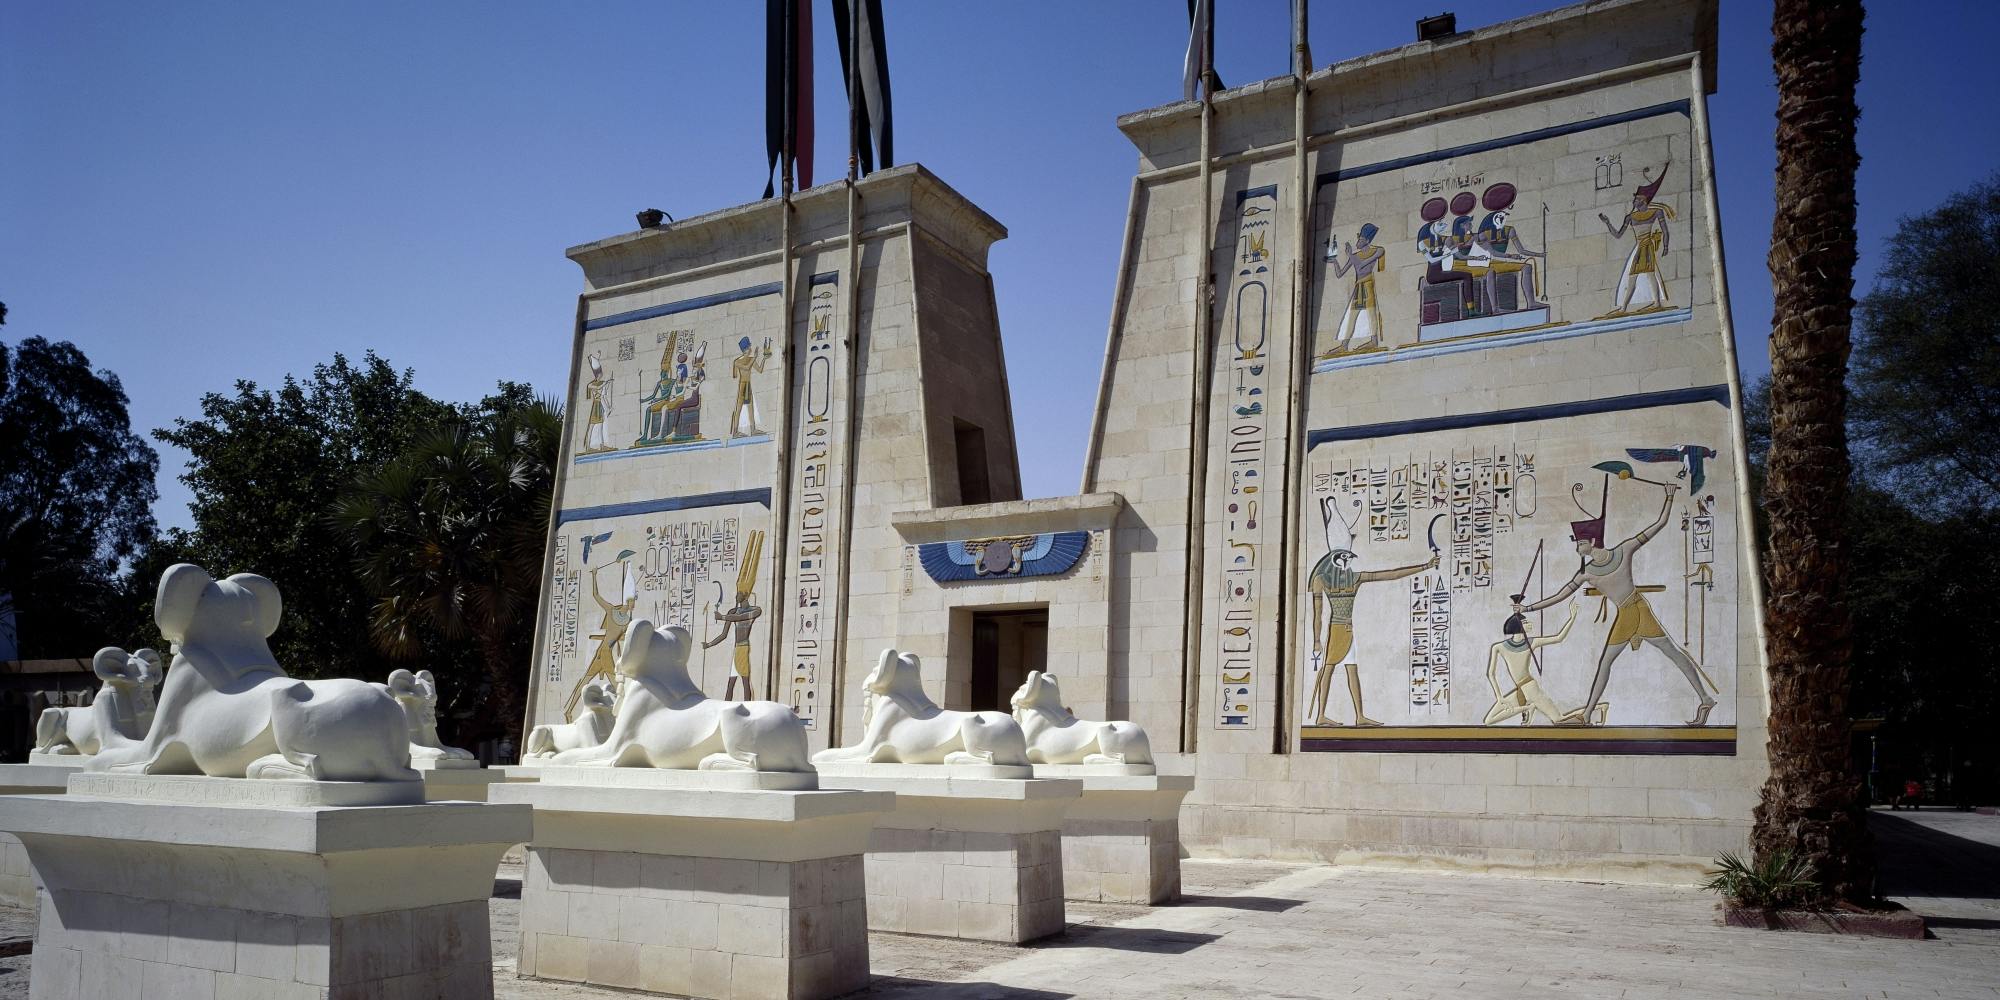 Half-day The Pharaonic village tour